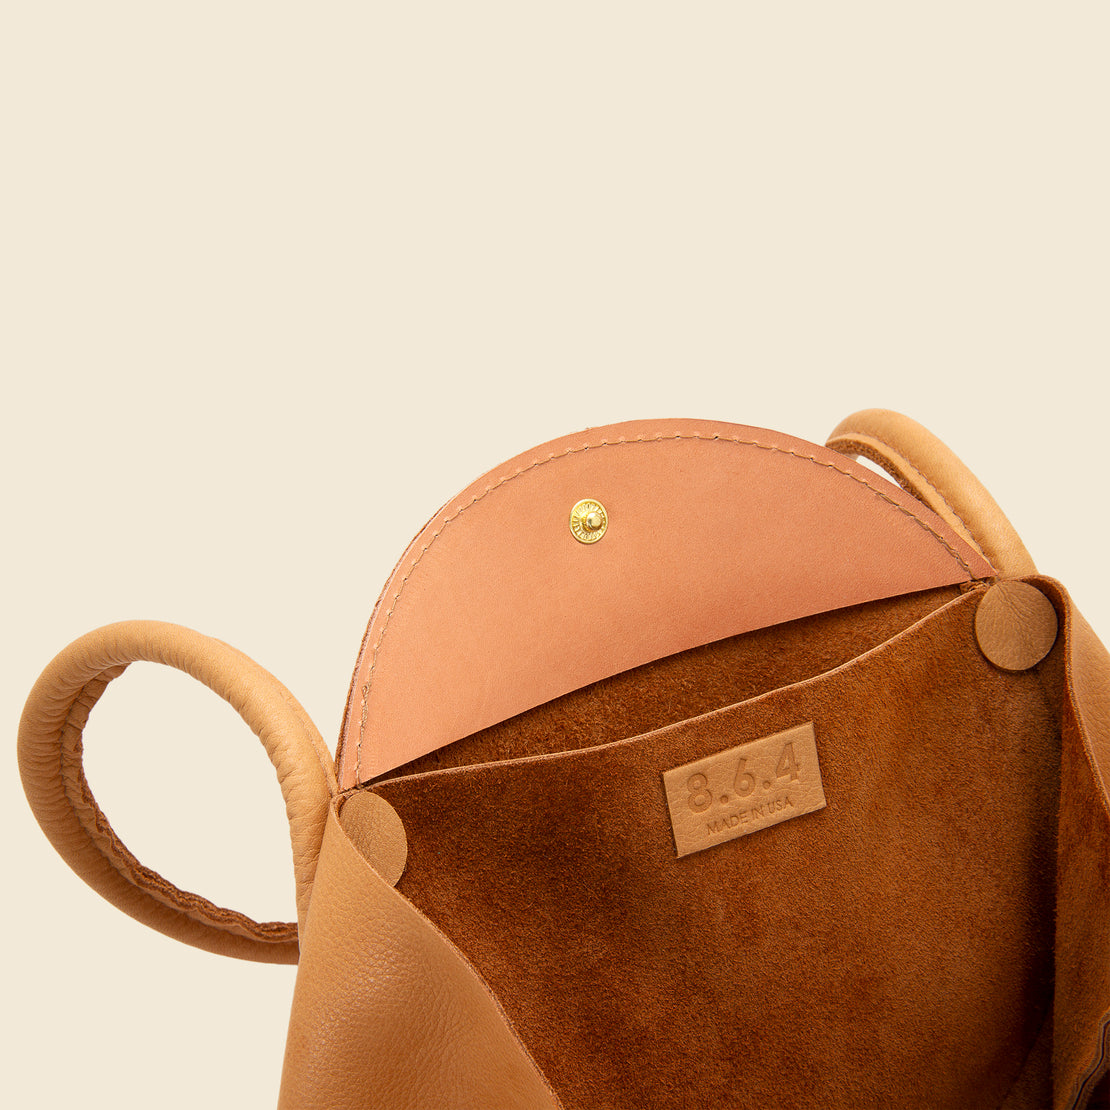 Circle Snap Tote - Tan - 8.6.4 Design - STAG Provisions - W - Accessories - Bag